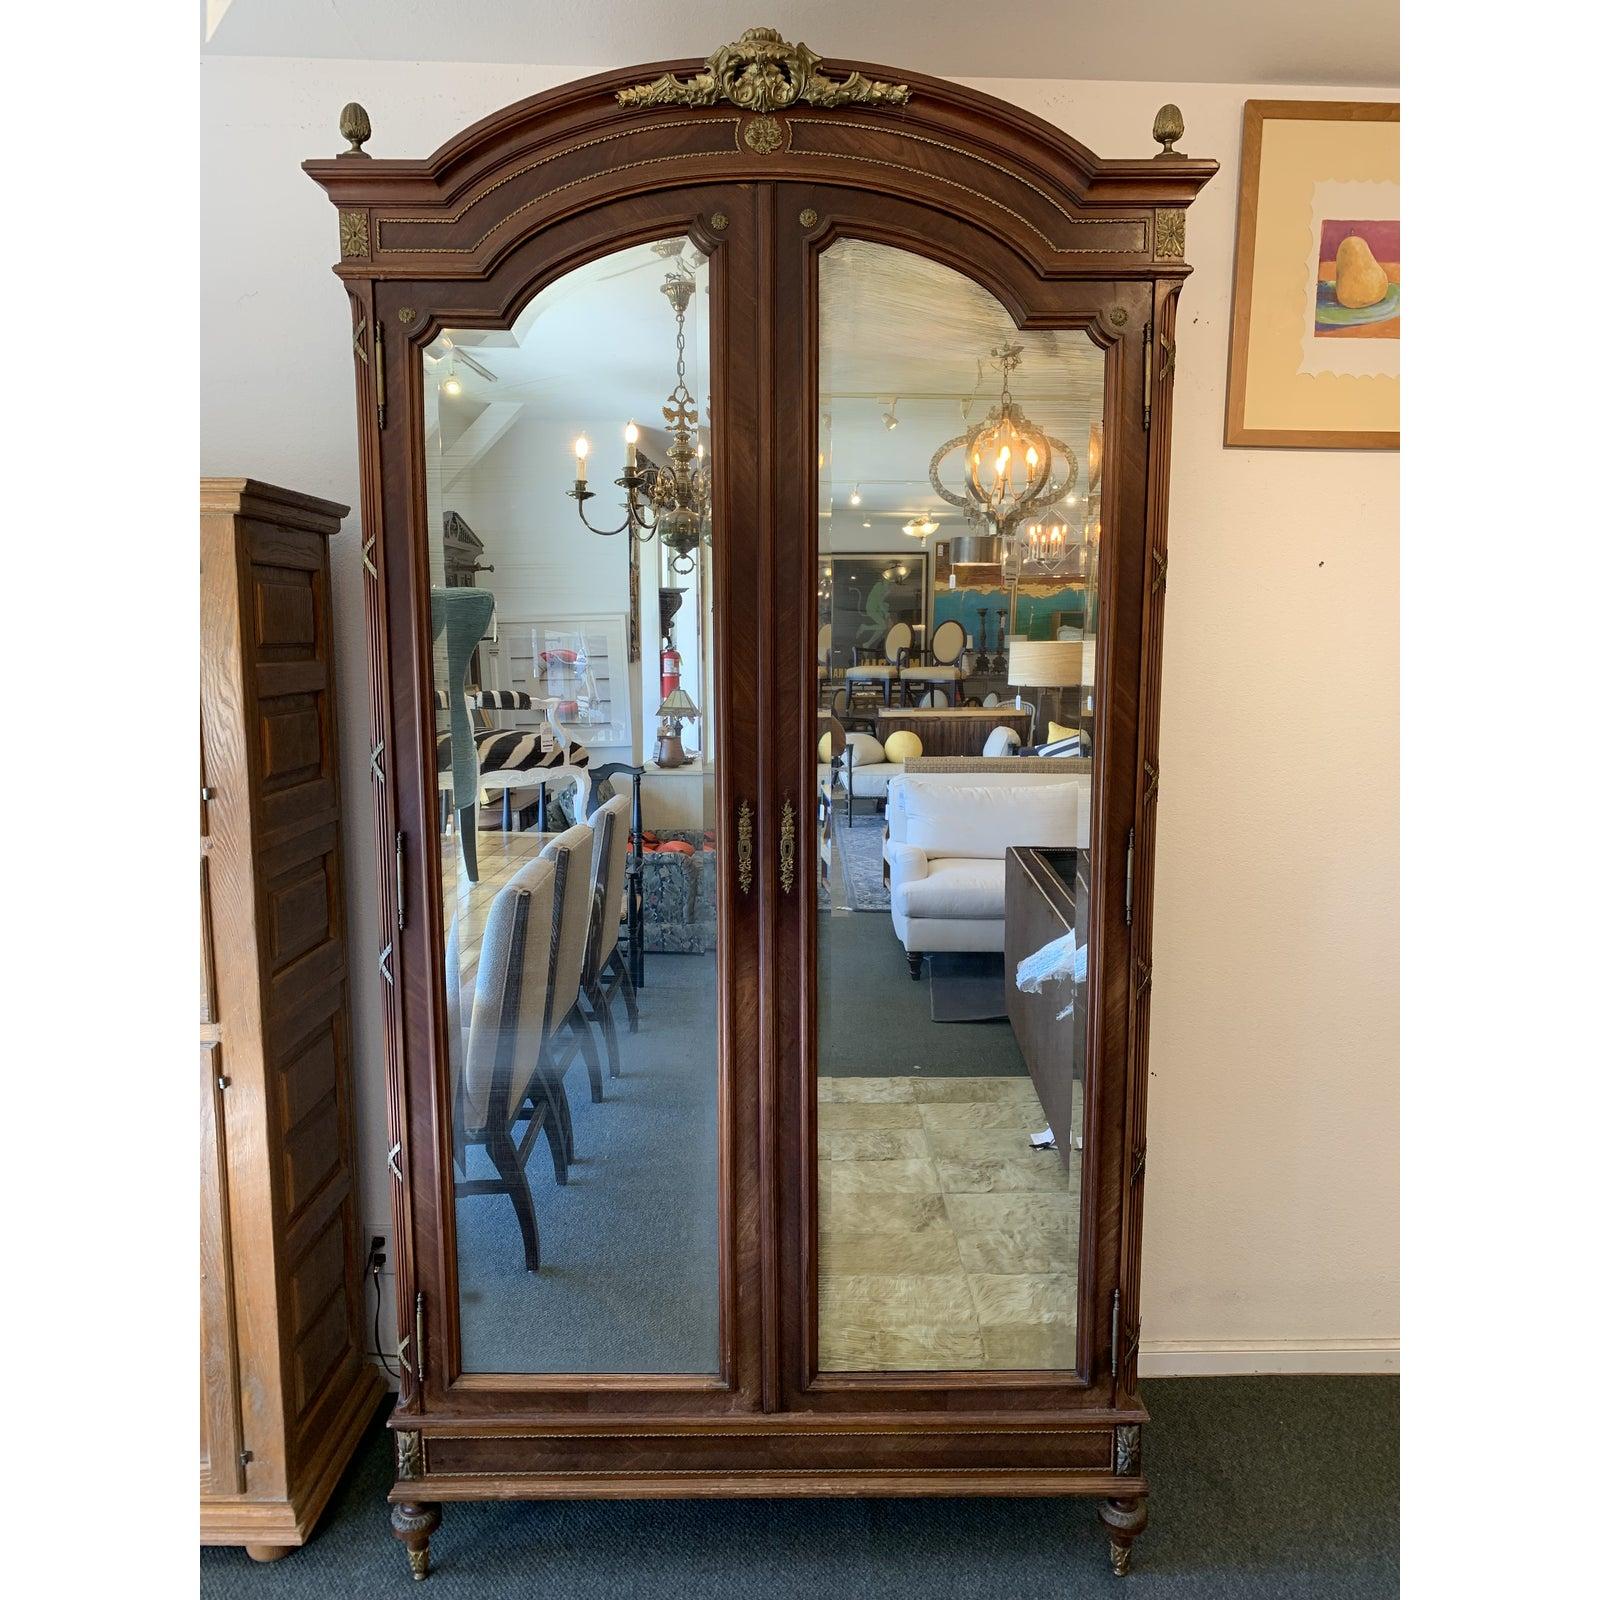 Design Plus Gallery presents a stunning Antique French Armoire. The French armoire is 19th Century mahogany-Louis XVI style with antiqued beveled mirror doors. The inside has beautiful shelves and several drawers that are finished with the same